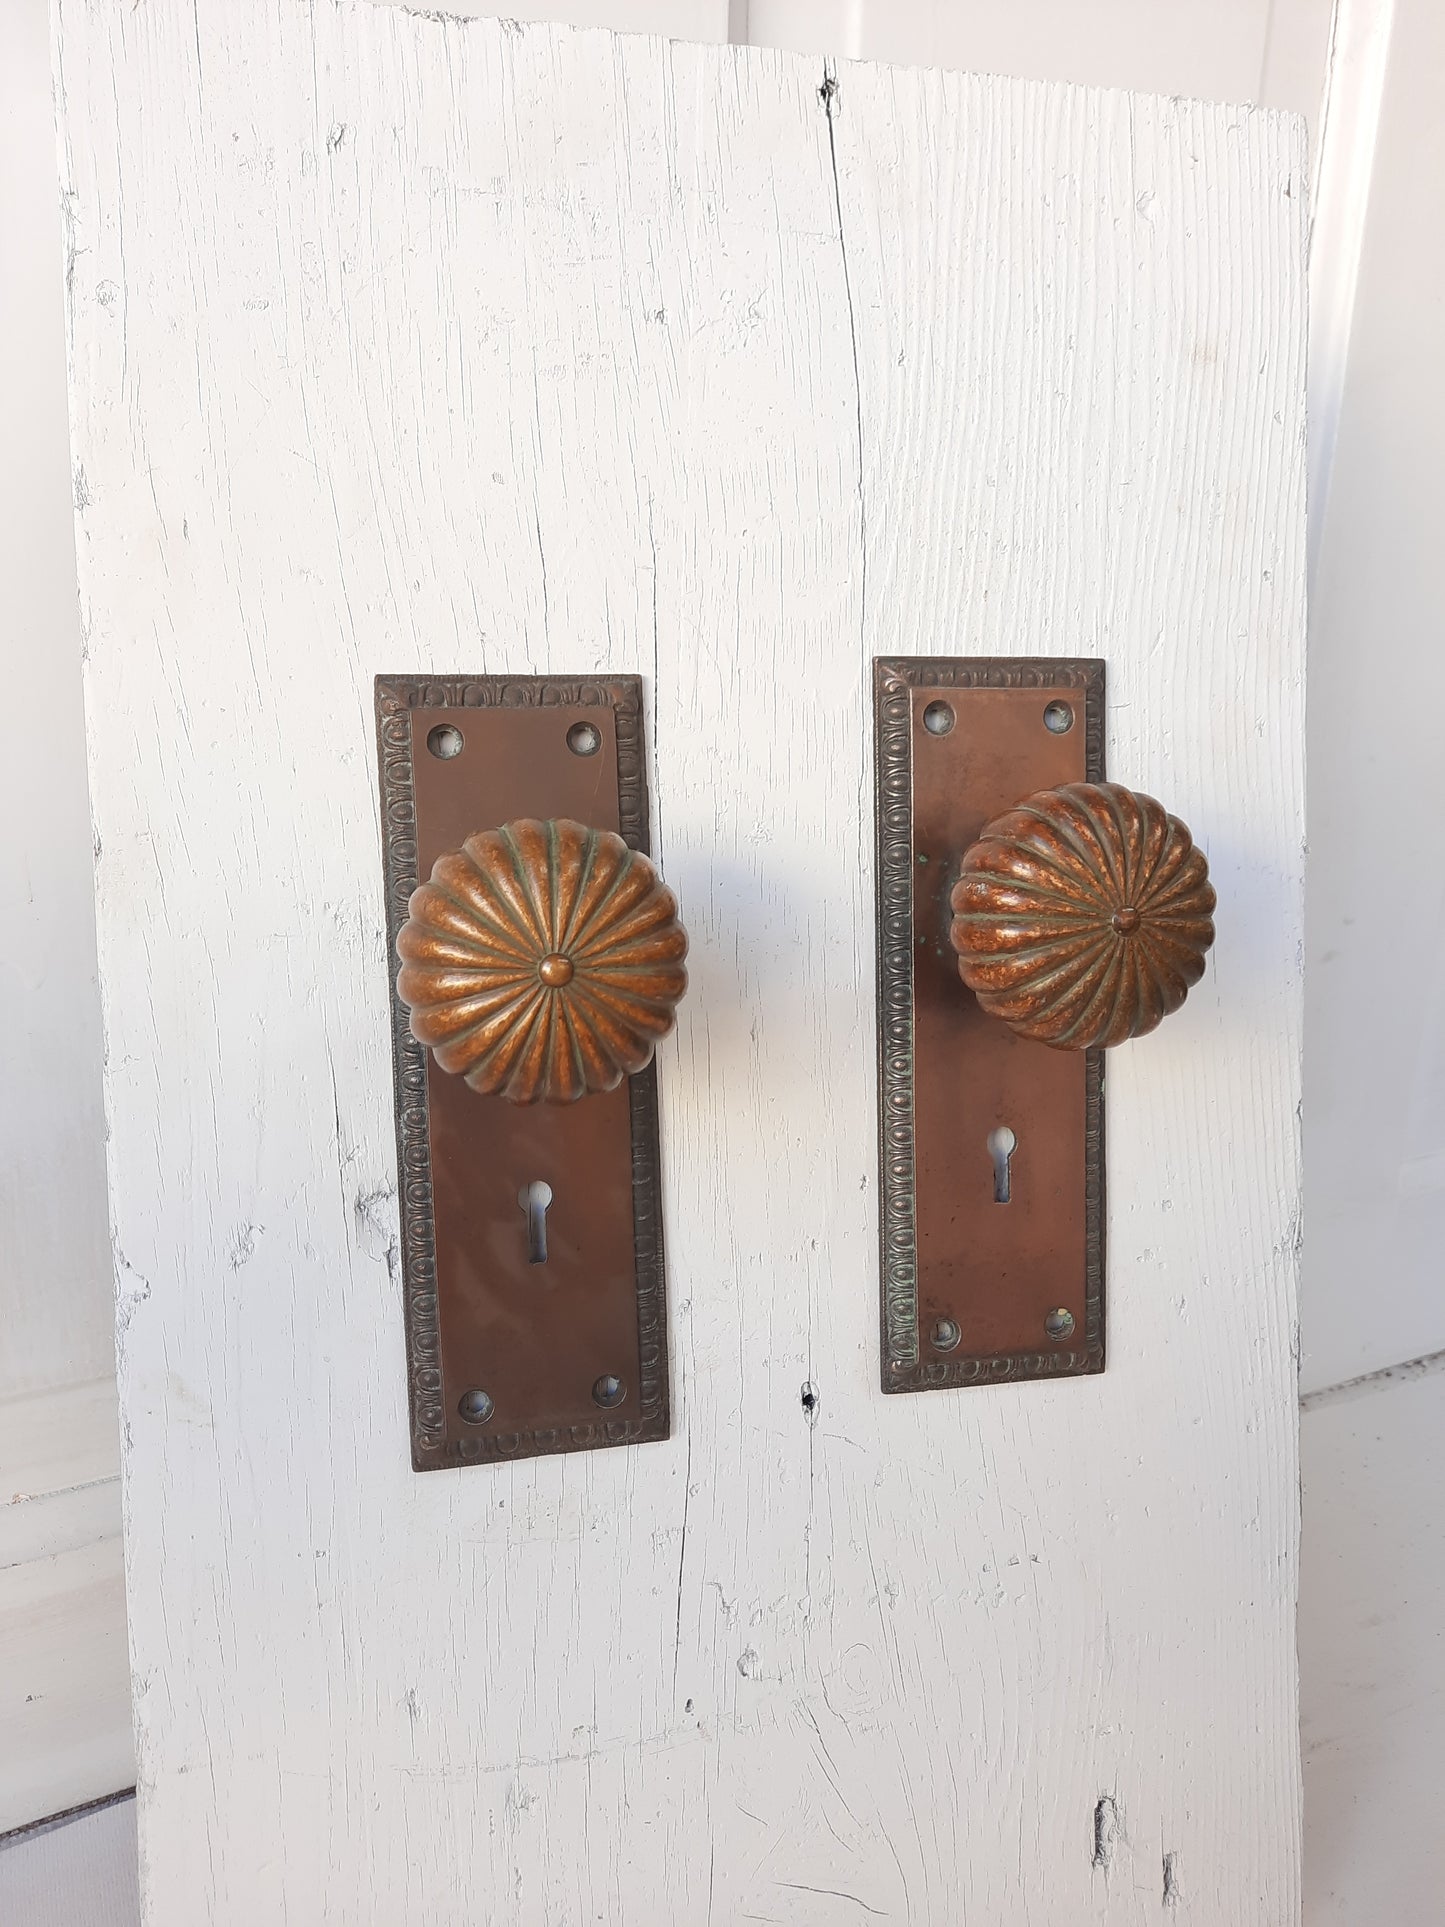 Solid Bronze Door Hardware Set with Scalloped Knobs and Plates 120701